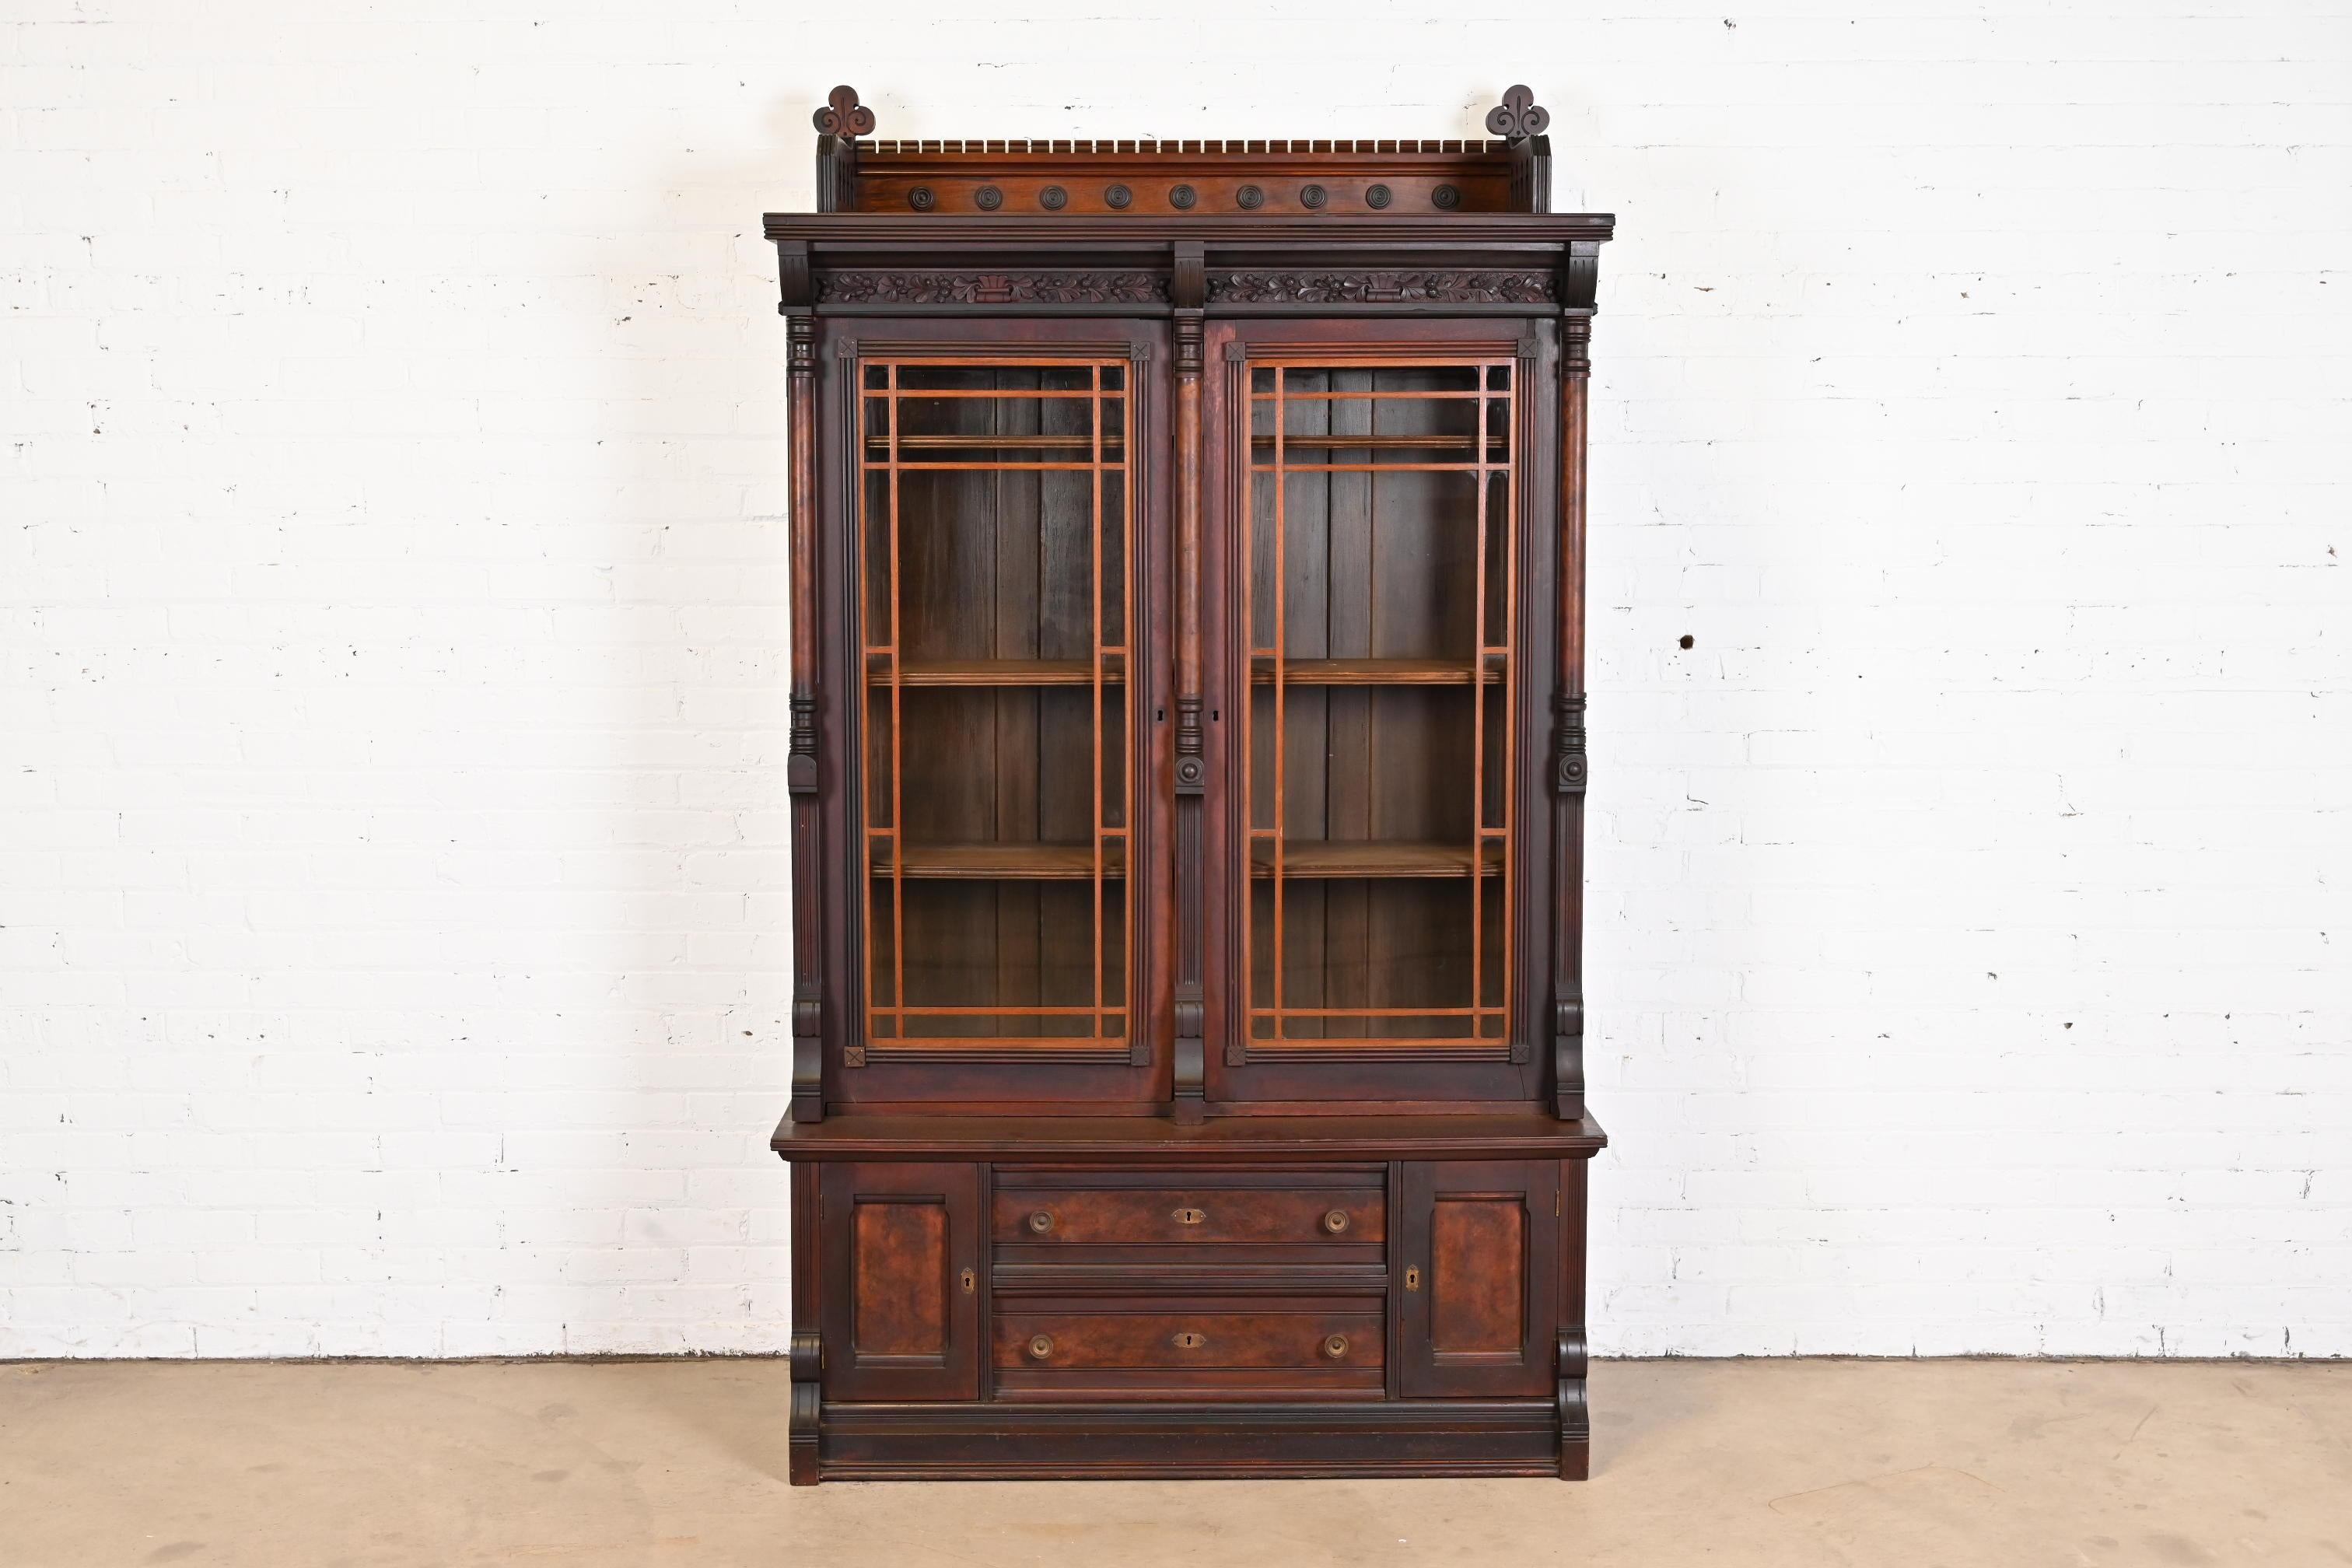 An outstanding antique Eastlake Victorian stepback bookcase

In the manner of Herter Brothers

USA, circa 1860s

Carved walnut, with burled walnut panels, mullioned glass front doors, and brass hardware.

Measures: 50